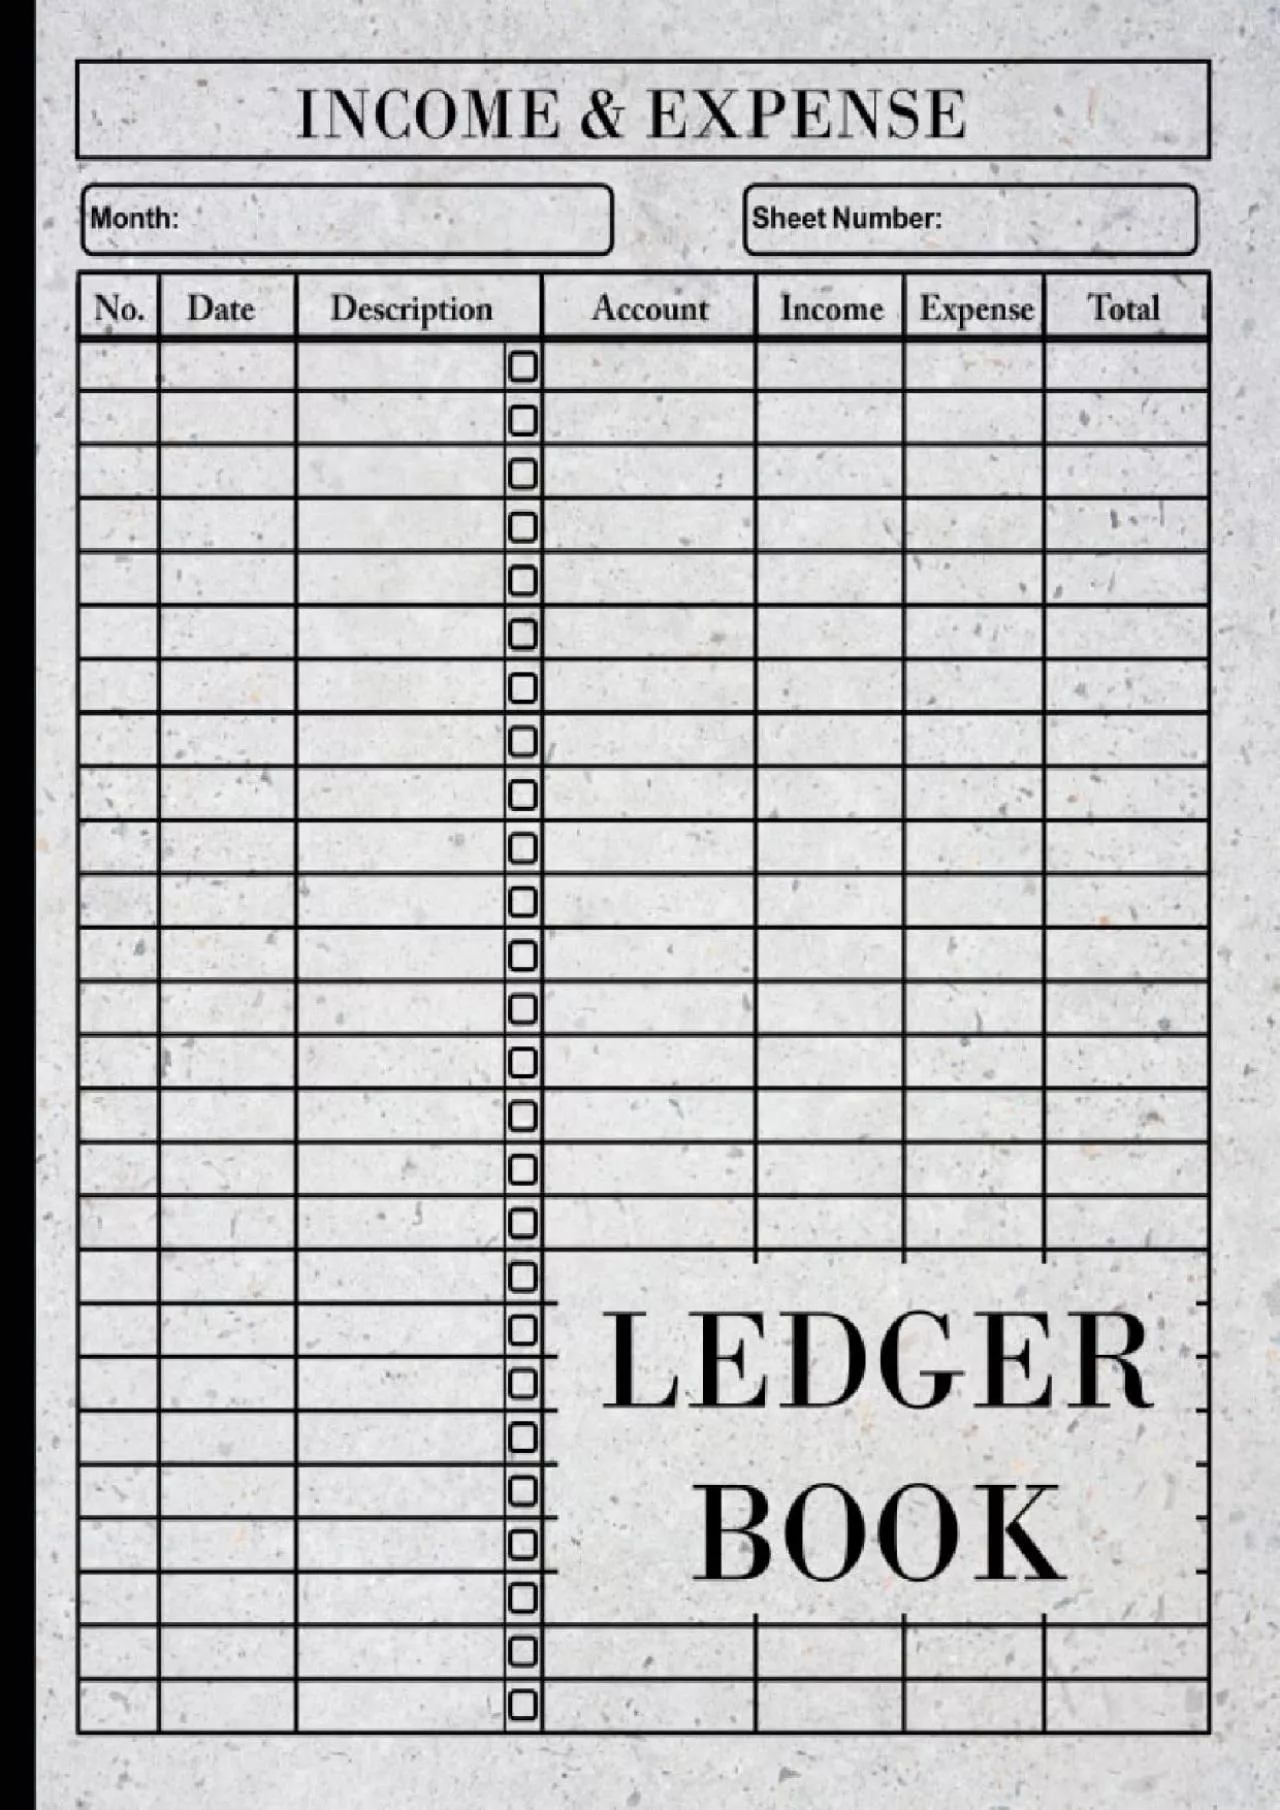 [DOWLOAD]-Ledger Book: Record Income and Expense / Income and Expense Log Book For Small